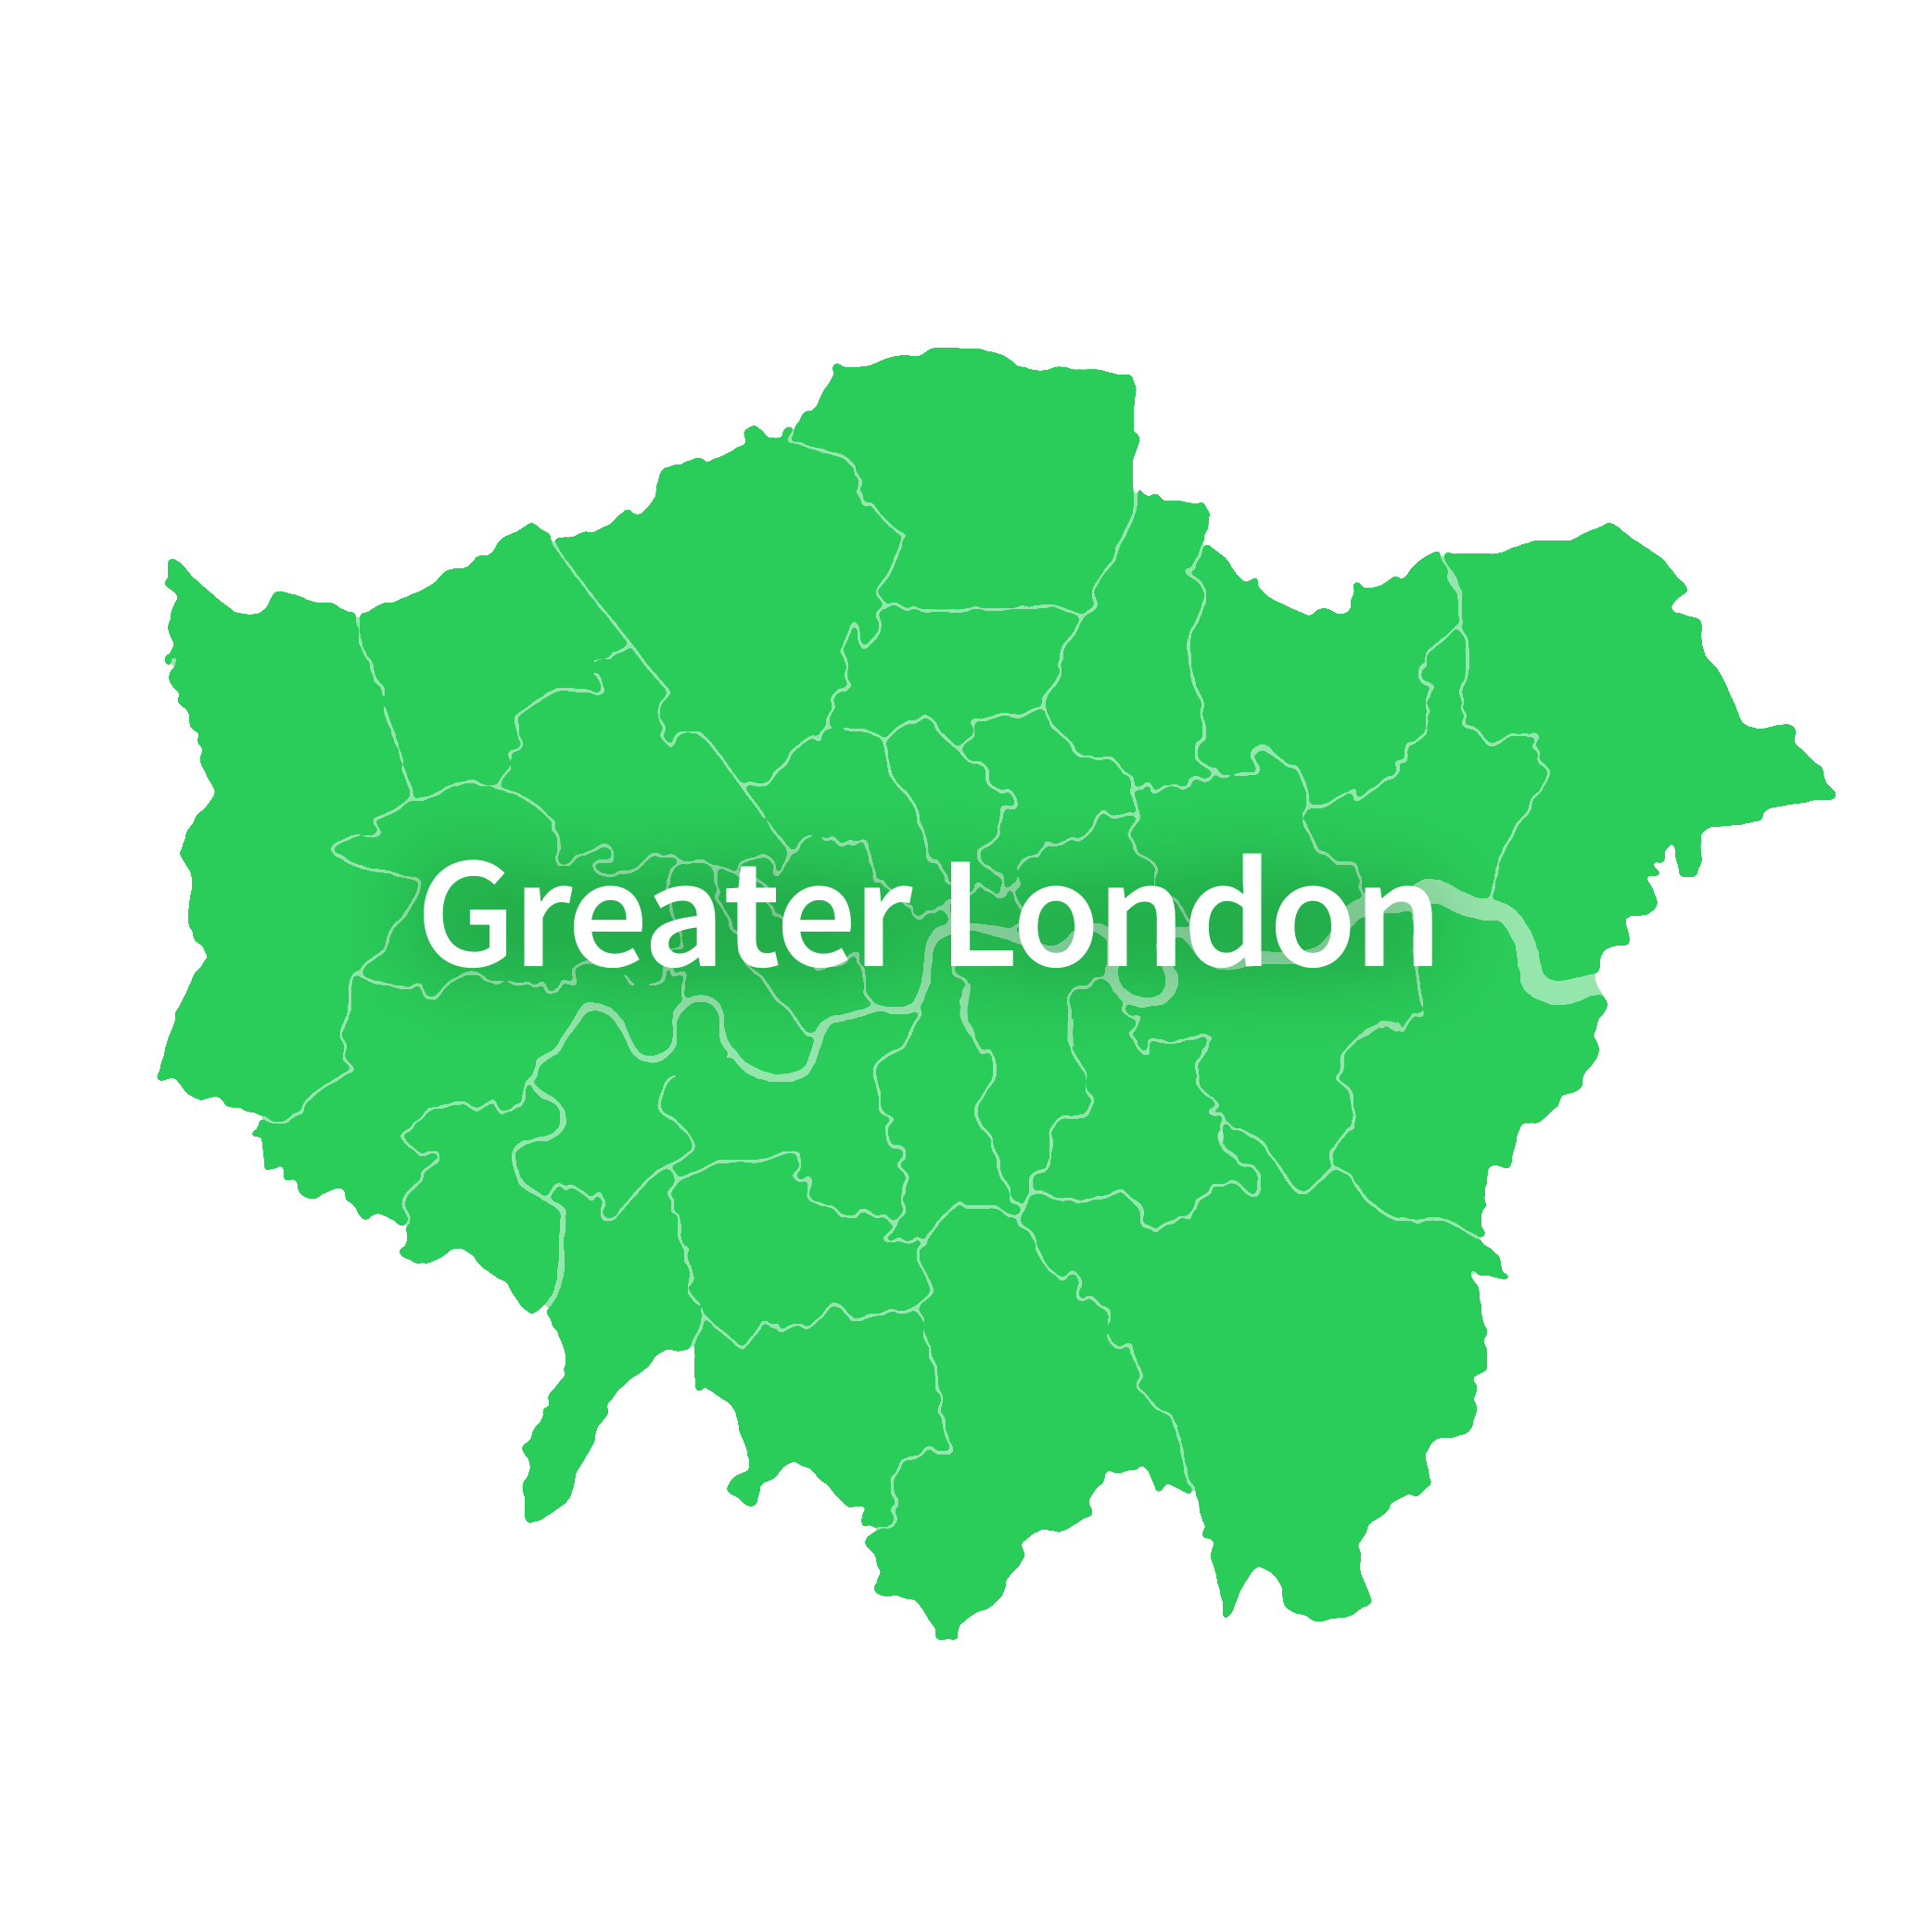 Map of Greater London